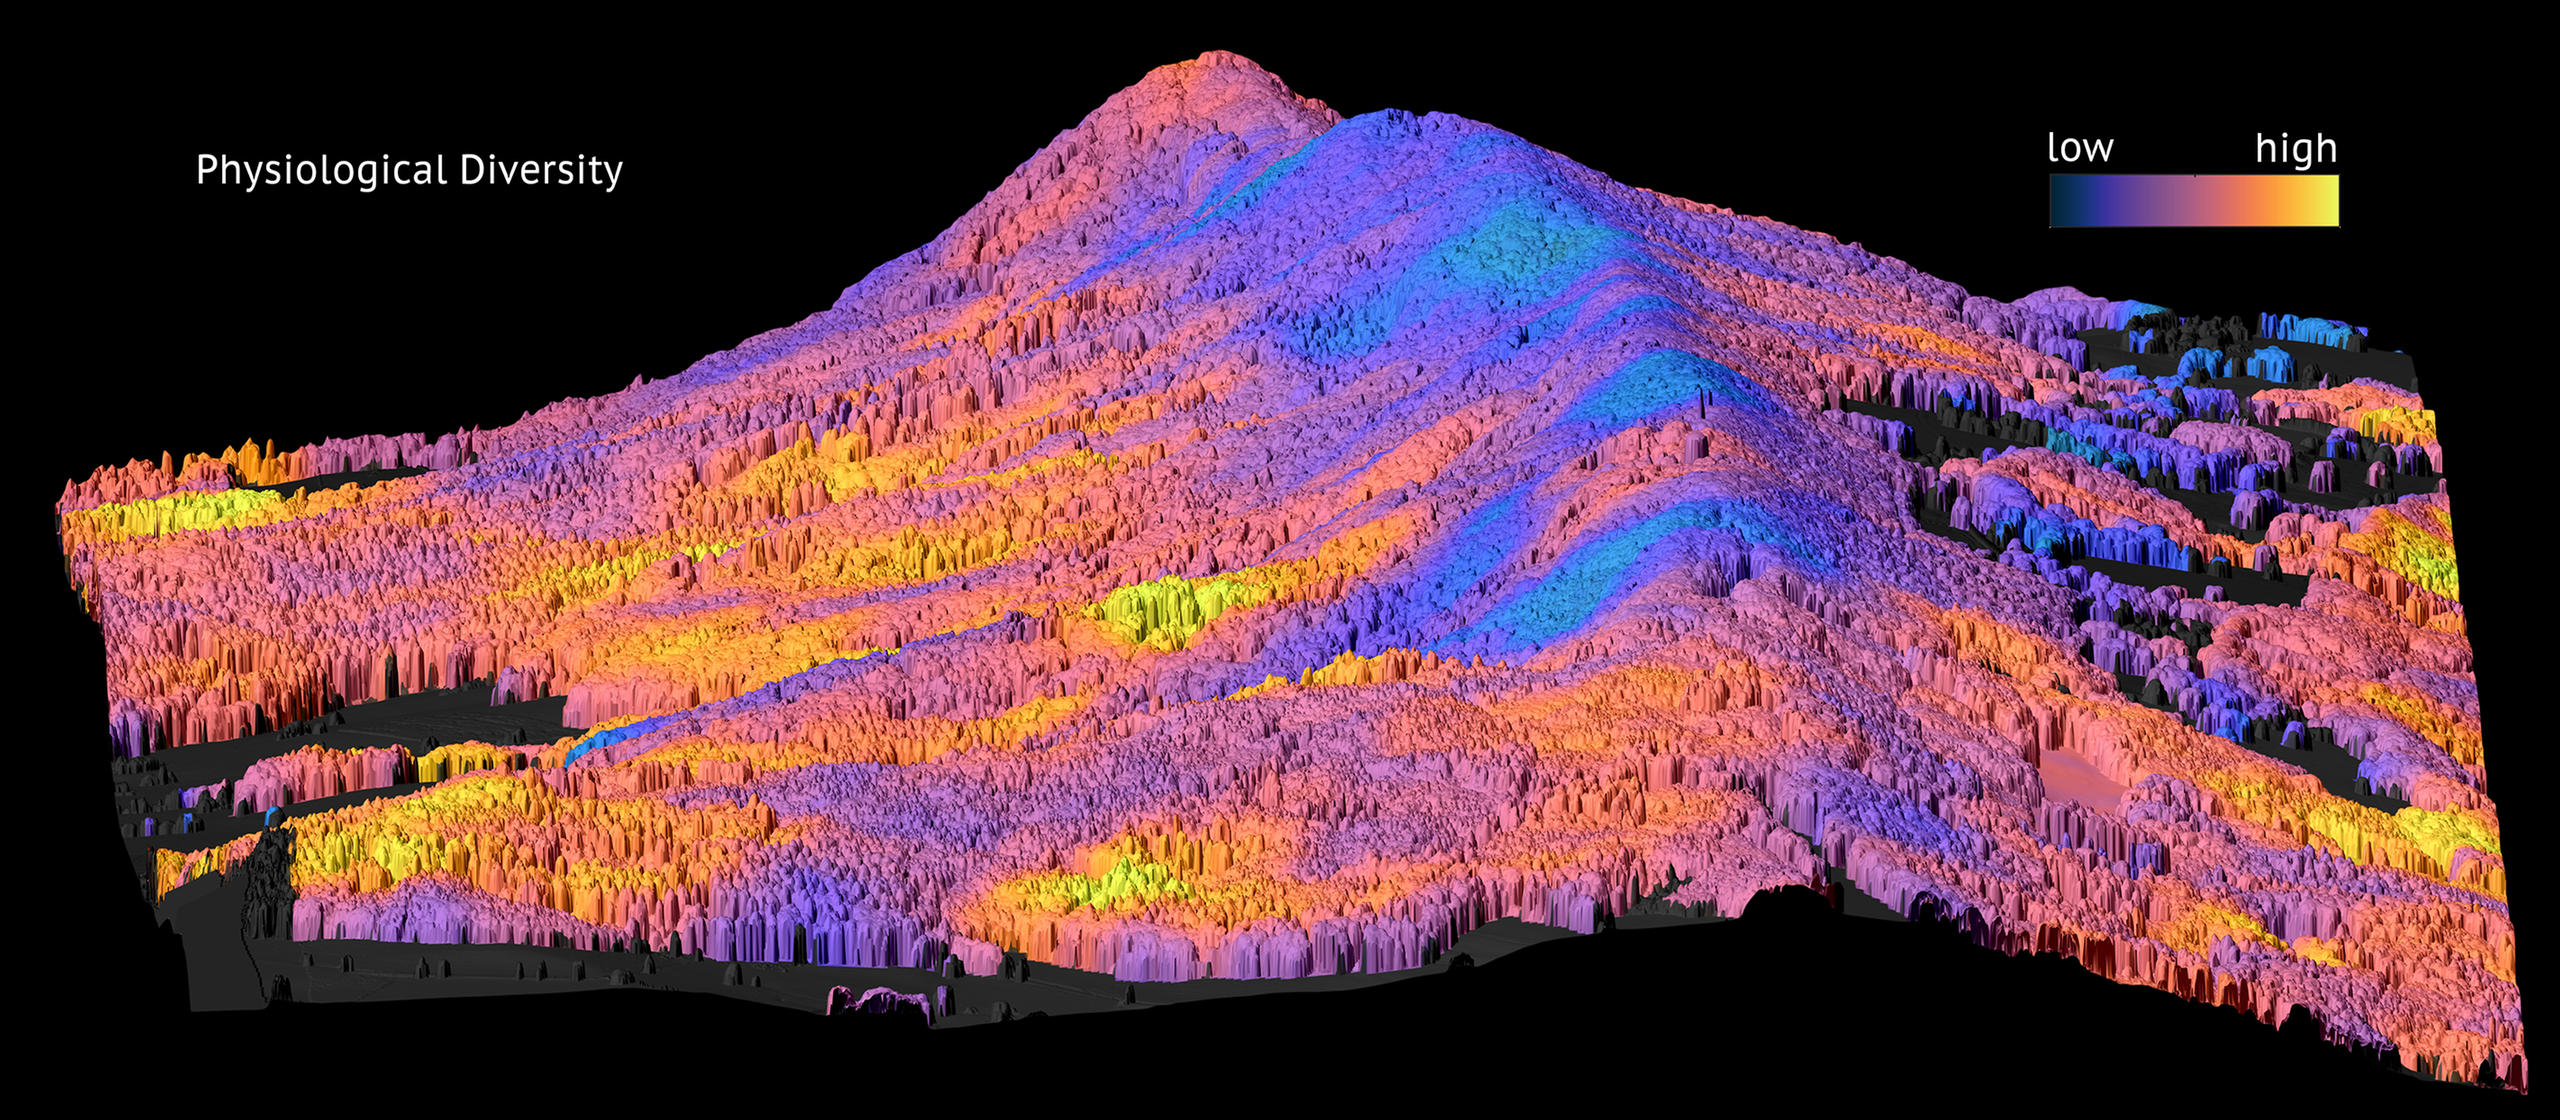 University of Zurich computer image mapping mountain forest diversity